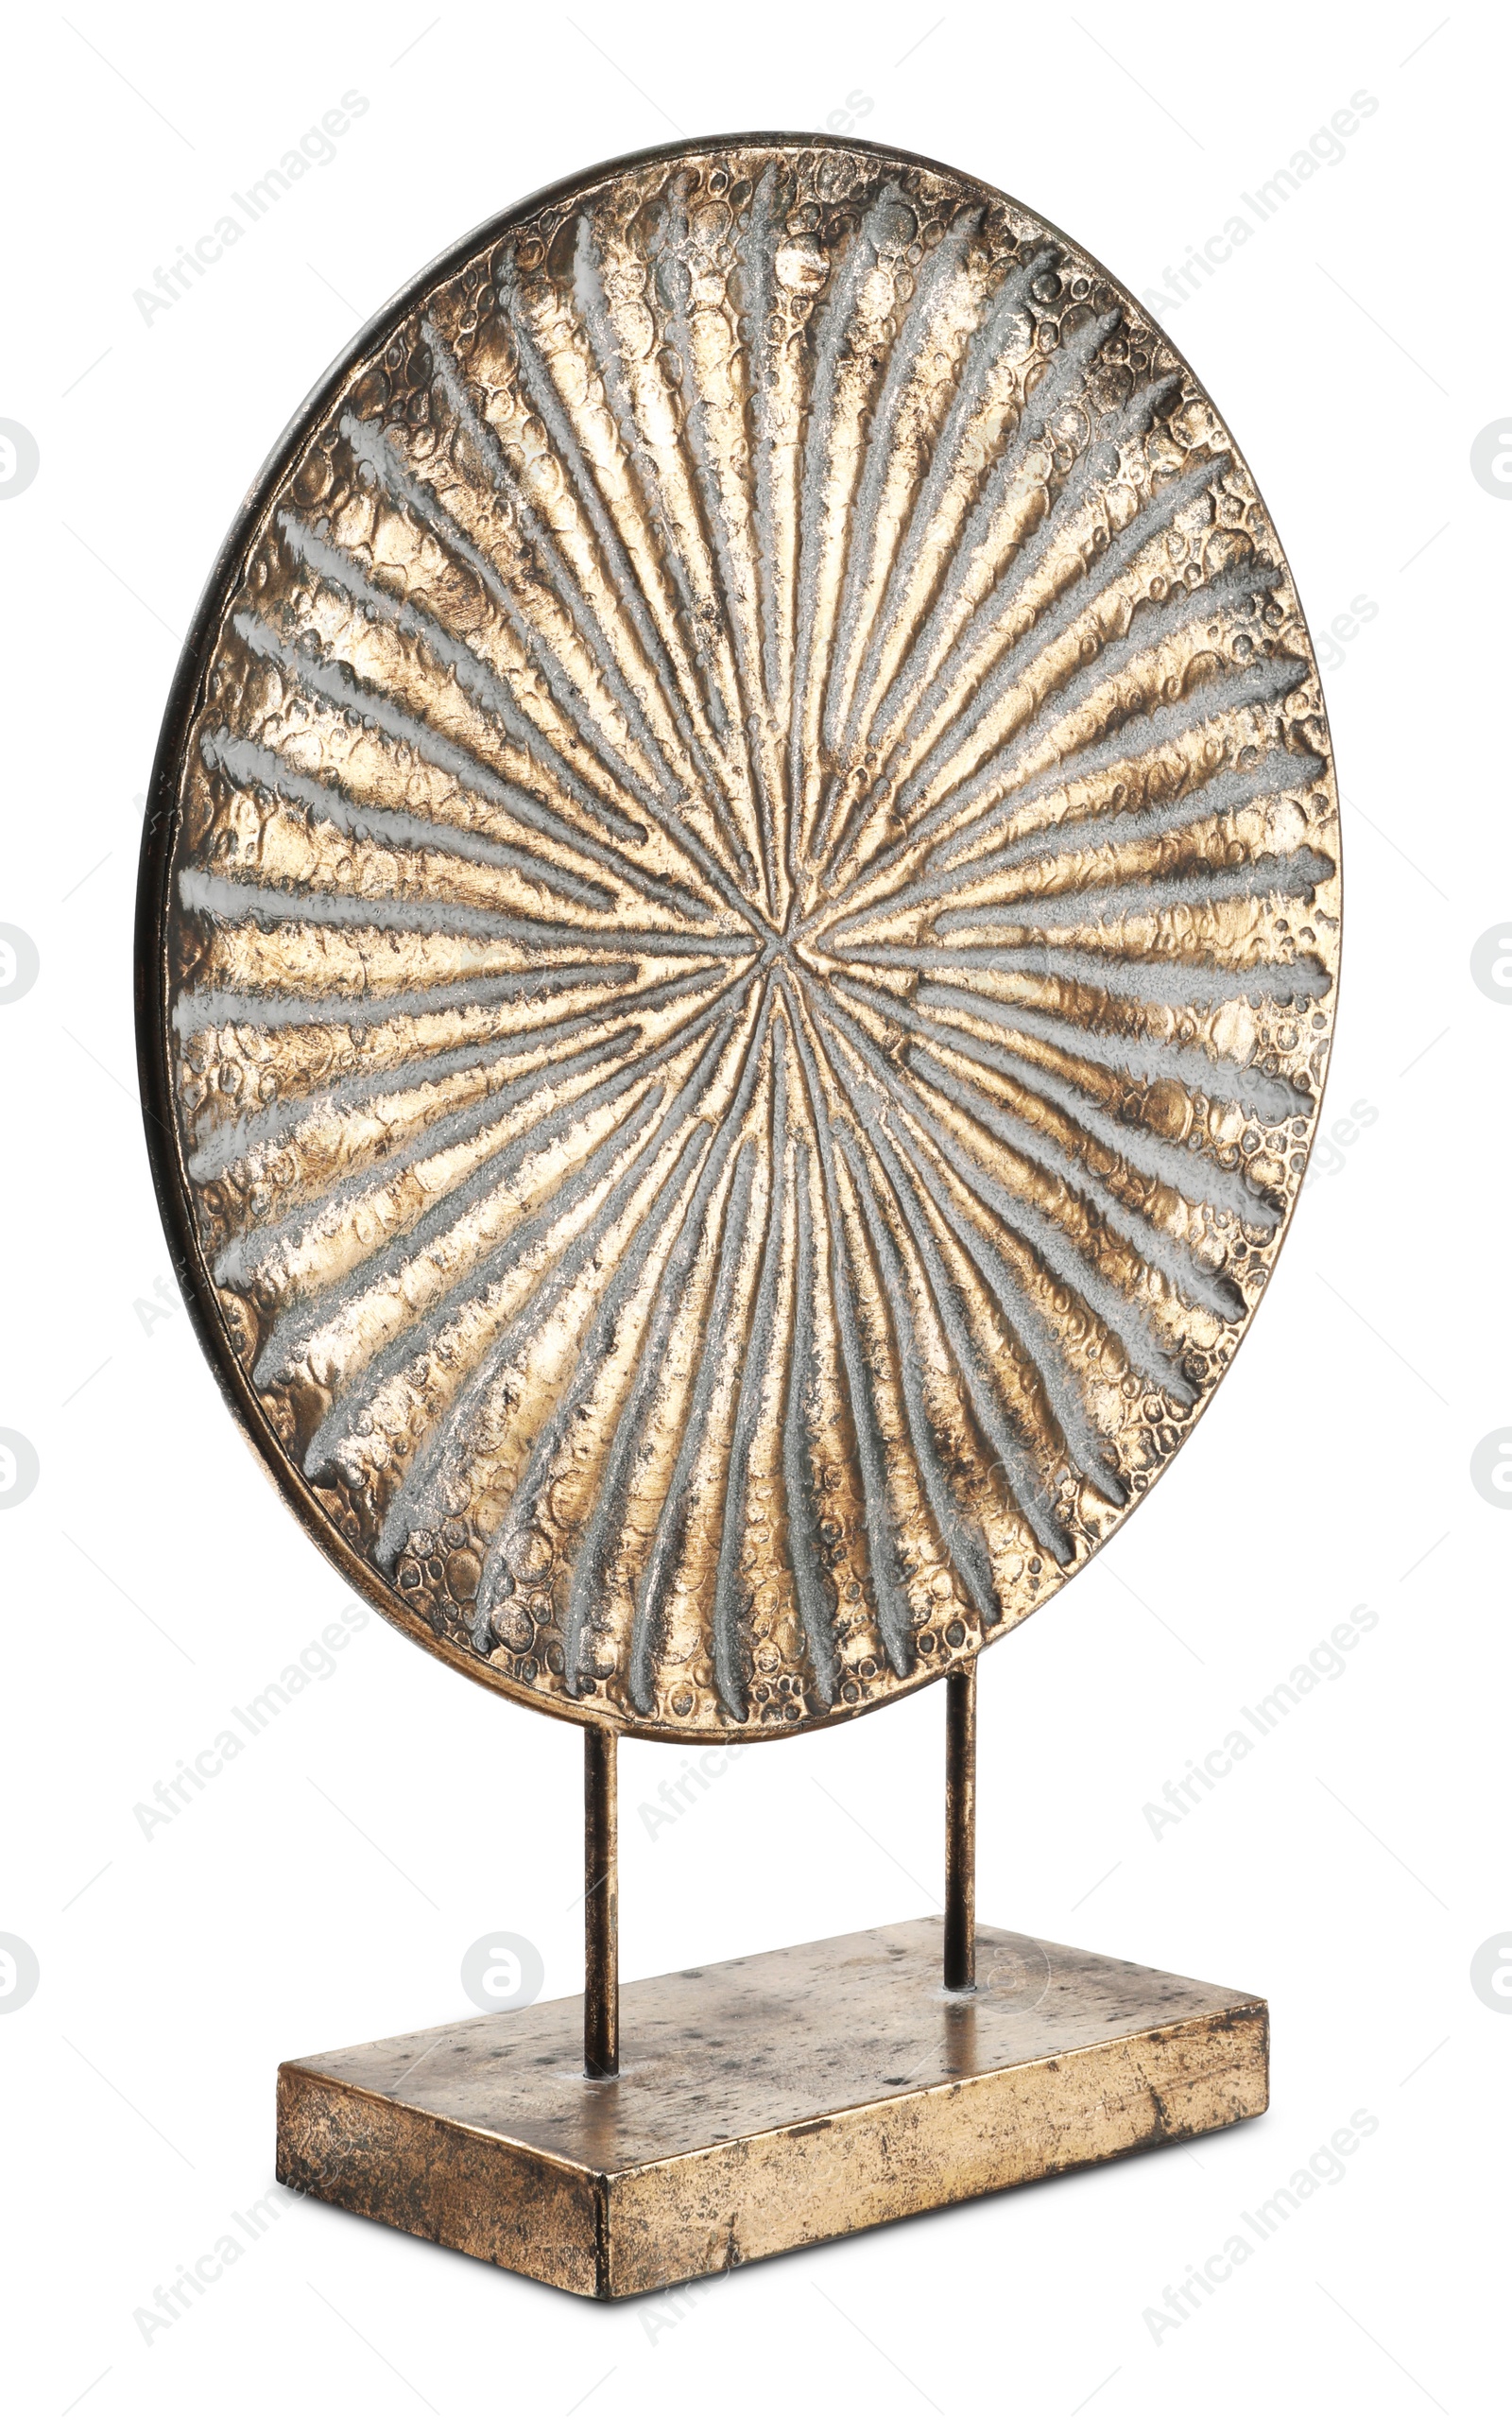 Photo of Beautiful decorative countryfield dish on white background